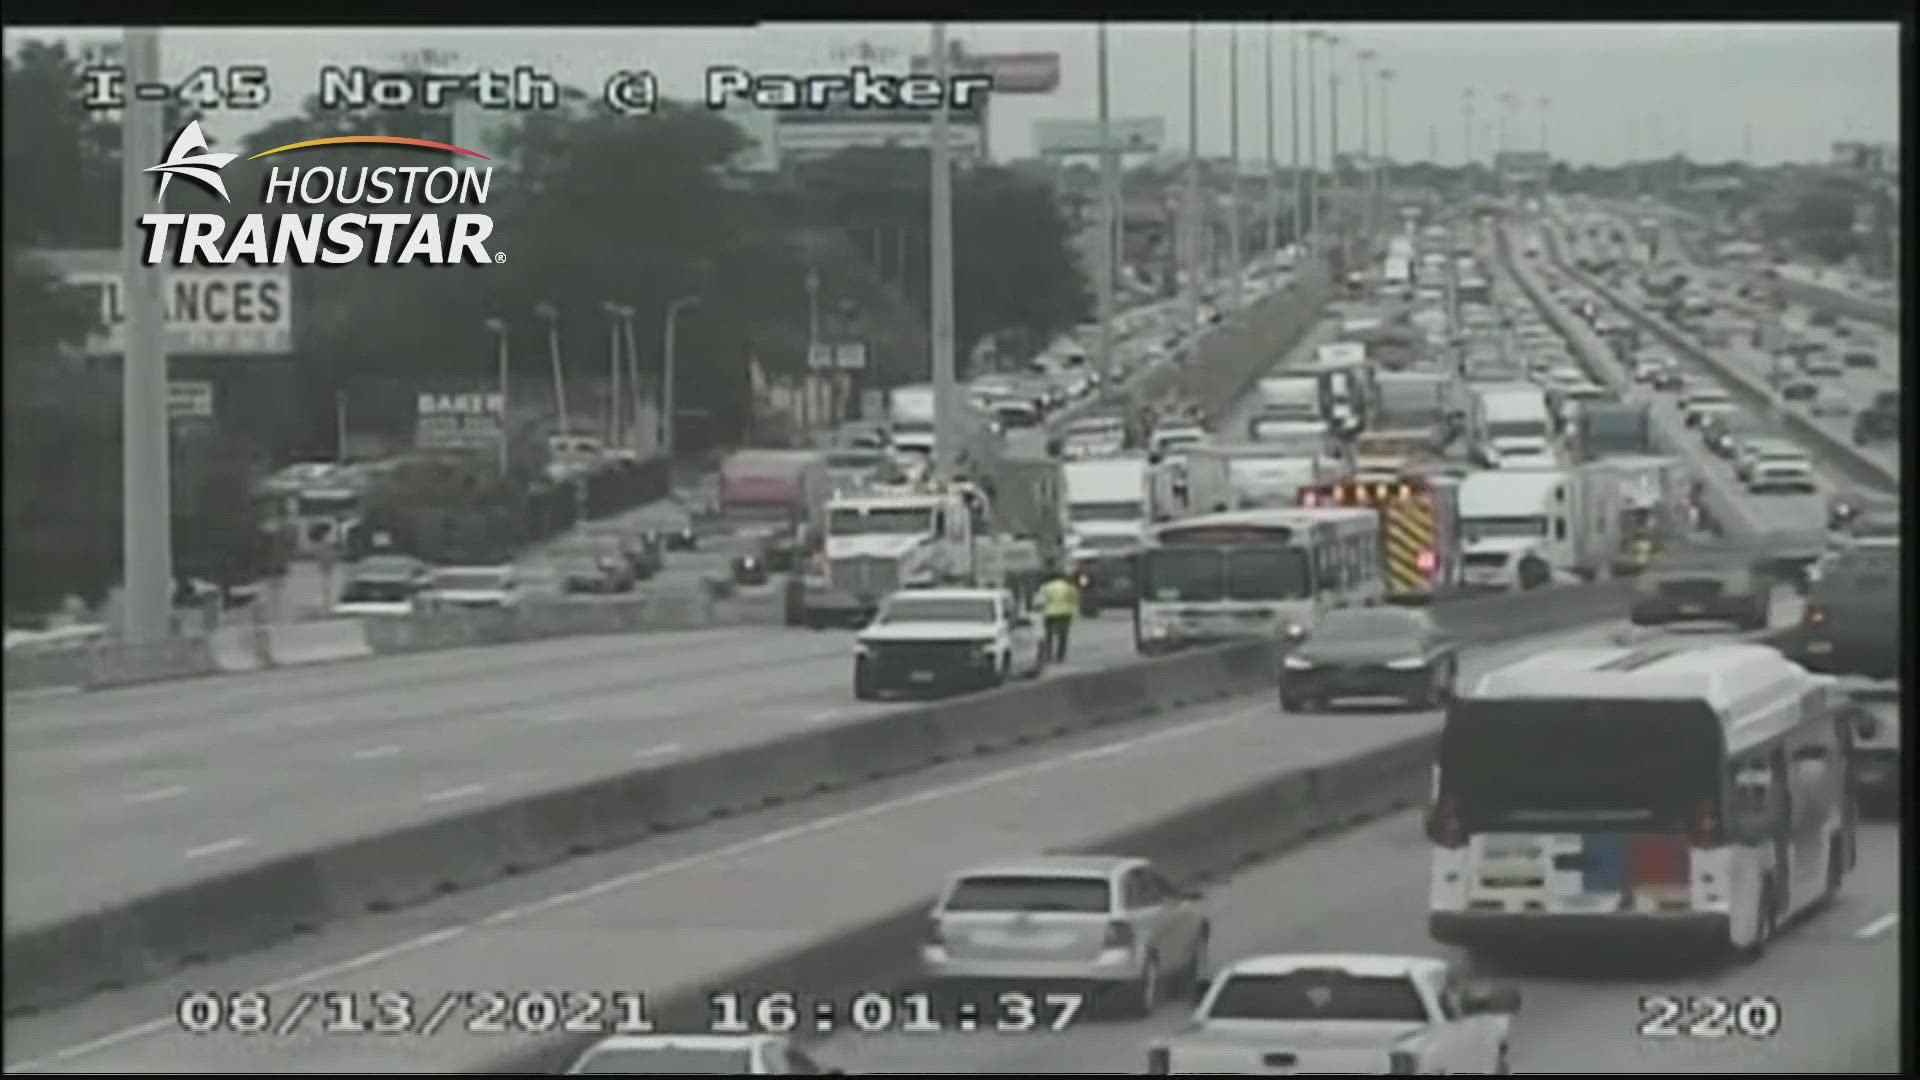 Houston police say multiple outbound lanes are shut down.